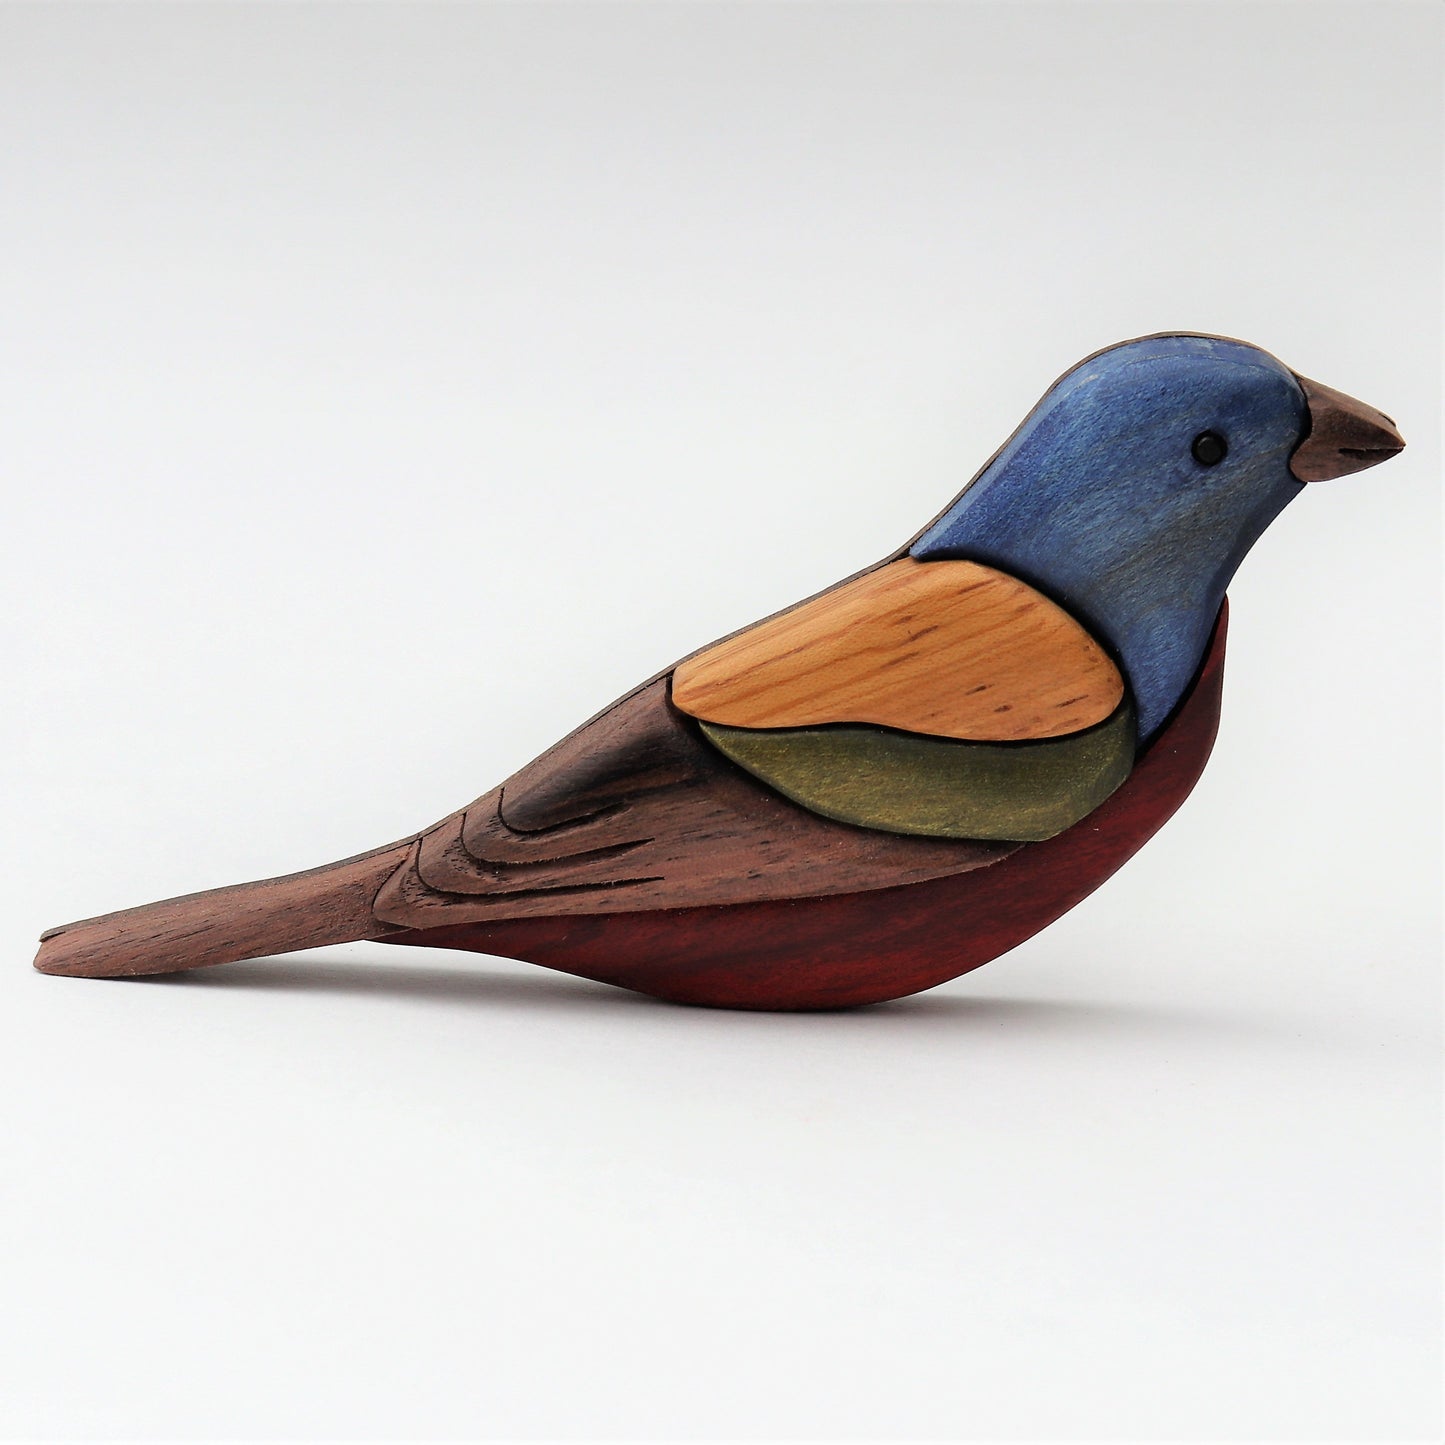 Painted Bunting Songbird Magnet / Ornament